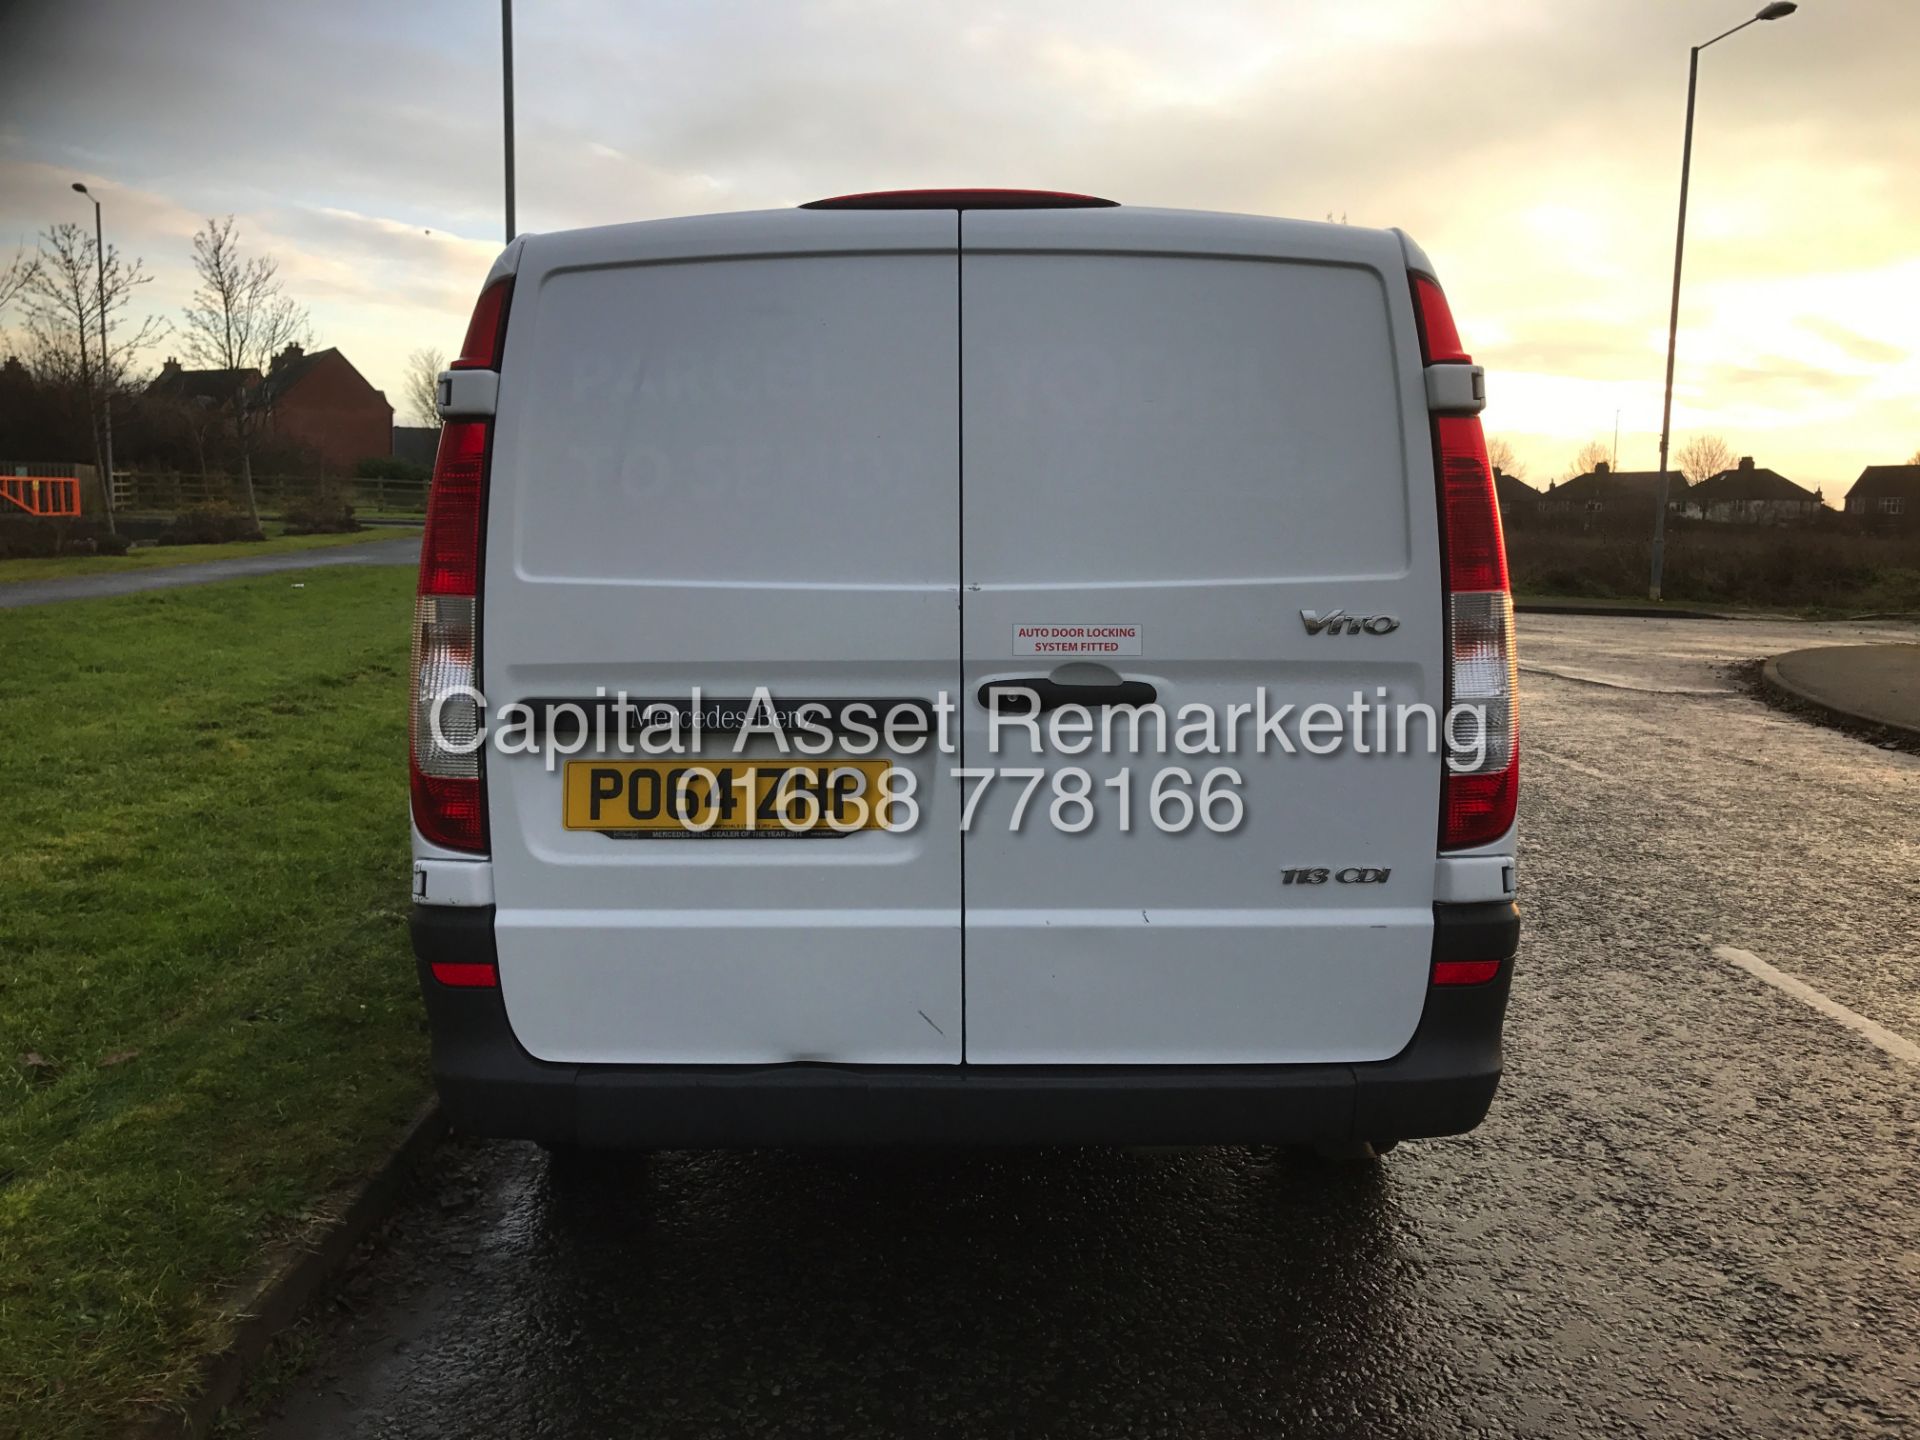 MERCEDES VITO 113CDI LWB (2015 MODEL - NEW SHAPE) 1 OWNER - LOW MILES - ELEC PACK - 130BHP - 6 SPEED - Image 6 of 16